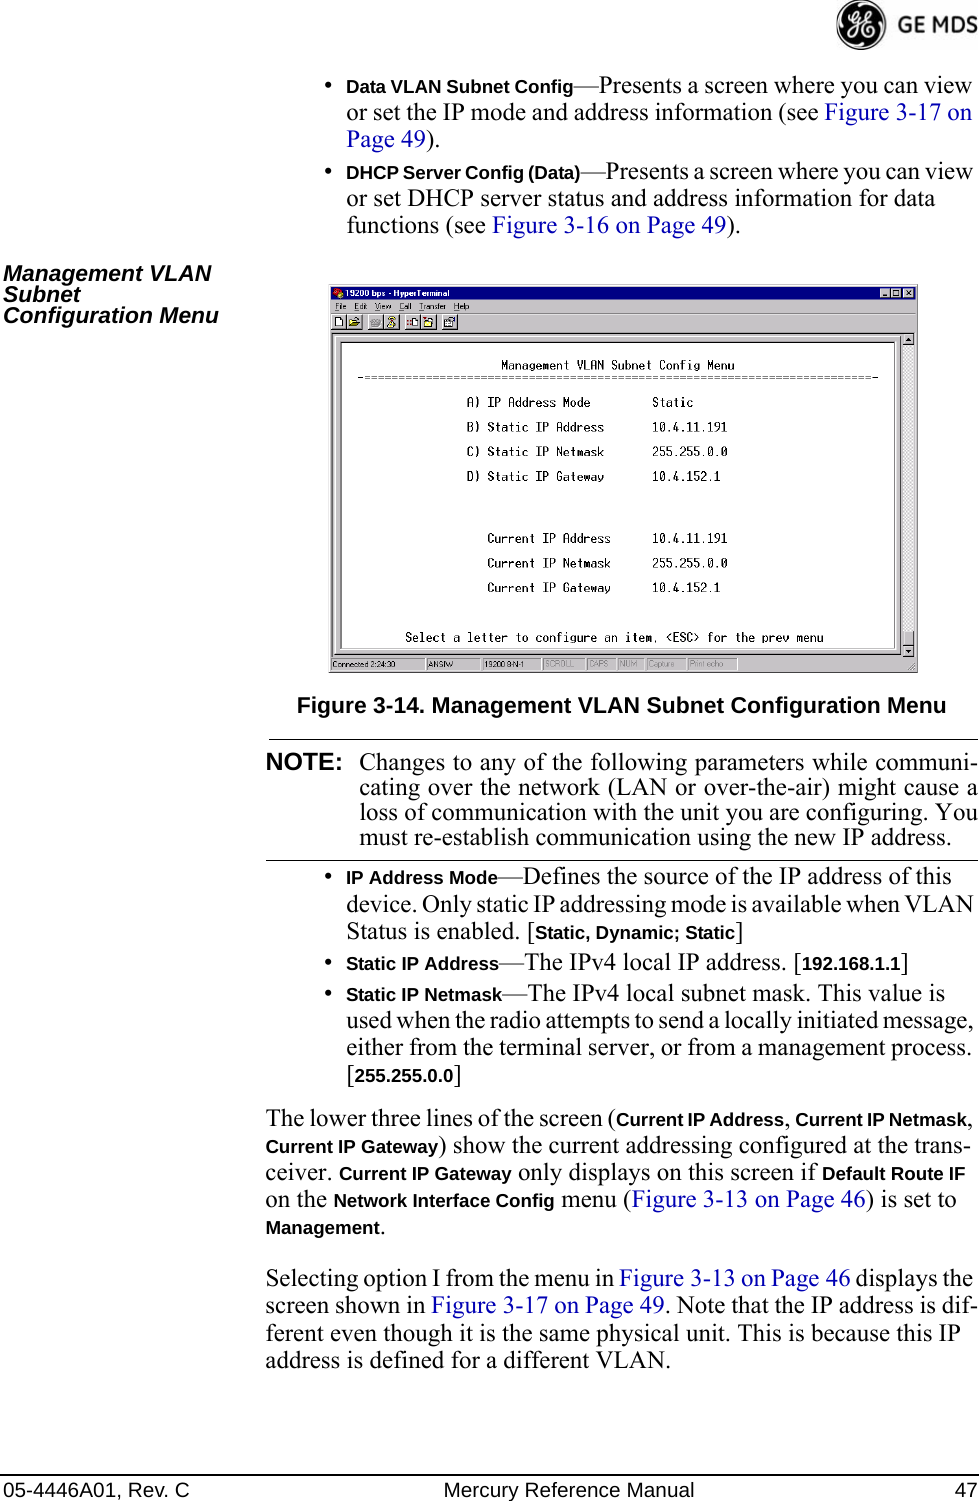 05-4446A01, Rev. C Mercury Reference Manual 47•Data VLAN Subnet Config—Presents a screen where you can view or set the IP mode and address information (see Figure 3-17 on Page 49).•DHCP Server Config (Data)—Presents a screen where you can view or set DHCP server status and address information for data functions (see Figure 3-16 on Page 49).Management VLAN Subnet Configuration MenuInvisible place holderFigure 3-14. Management VLAN Subnet Configuration MenuNOTE: Changes to any of the following parameters while communi-cating over the network (LAN or over-the-air) might cause aloss of communication with the unit you are configuring. Youmust re-establish communication using the new IP address.•IP Address Mode—Defines the source of the IP address of this device. Only static IP addressing mode is available when VLAN Status is enabled. [Static, Dynamic; Static]•Static IP Address—The IPv4 local IP address. [192.168.1.1]•Static IP Netmask—The IPv4 local subnet mask. This value is used when the radio attempts to send a locally initiated message, either from the terminal server, or from a management process. [255.255.0.0]The lower three lines of the screen (Current IP Address, Current IP Netmask, Current IP Gateway) show the current addressing configured at the trans-ceiver. Current IP Gateway only displays on this screen if Default Route IF on the Network Interface Config menu (Figure 3-13 on Page 46) is set to Management.Selecting option I from the menu in Figure 3-13 on Page 46 displays the screen shown in Figure 3-17 on Page 49. Note that the IP address is dif-ferent even though it is the same physical unit. This is because this IP address is defined for a different VLAN.